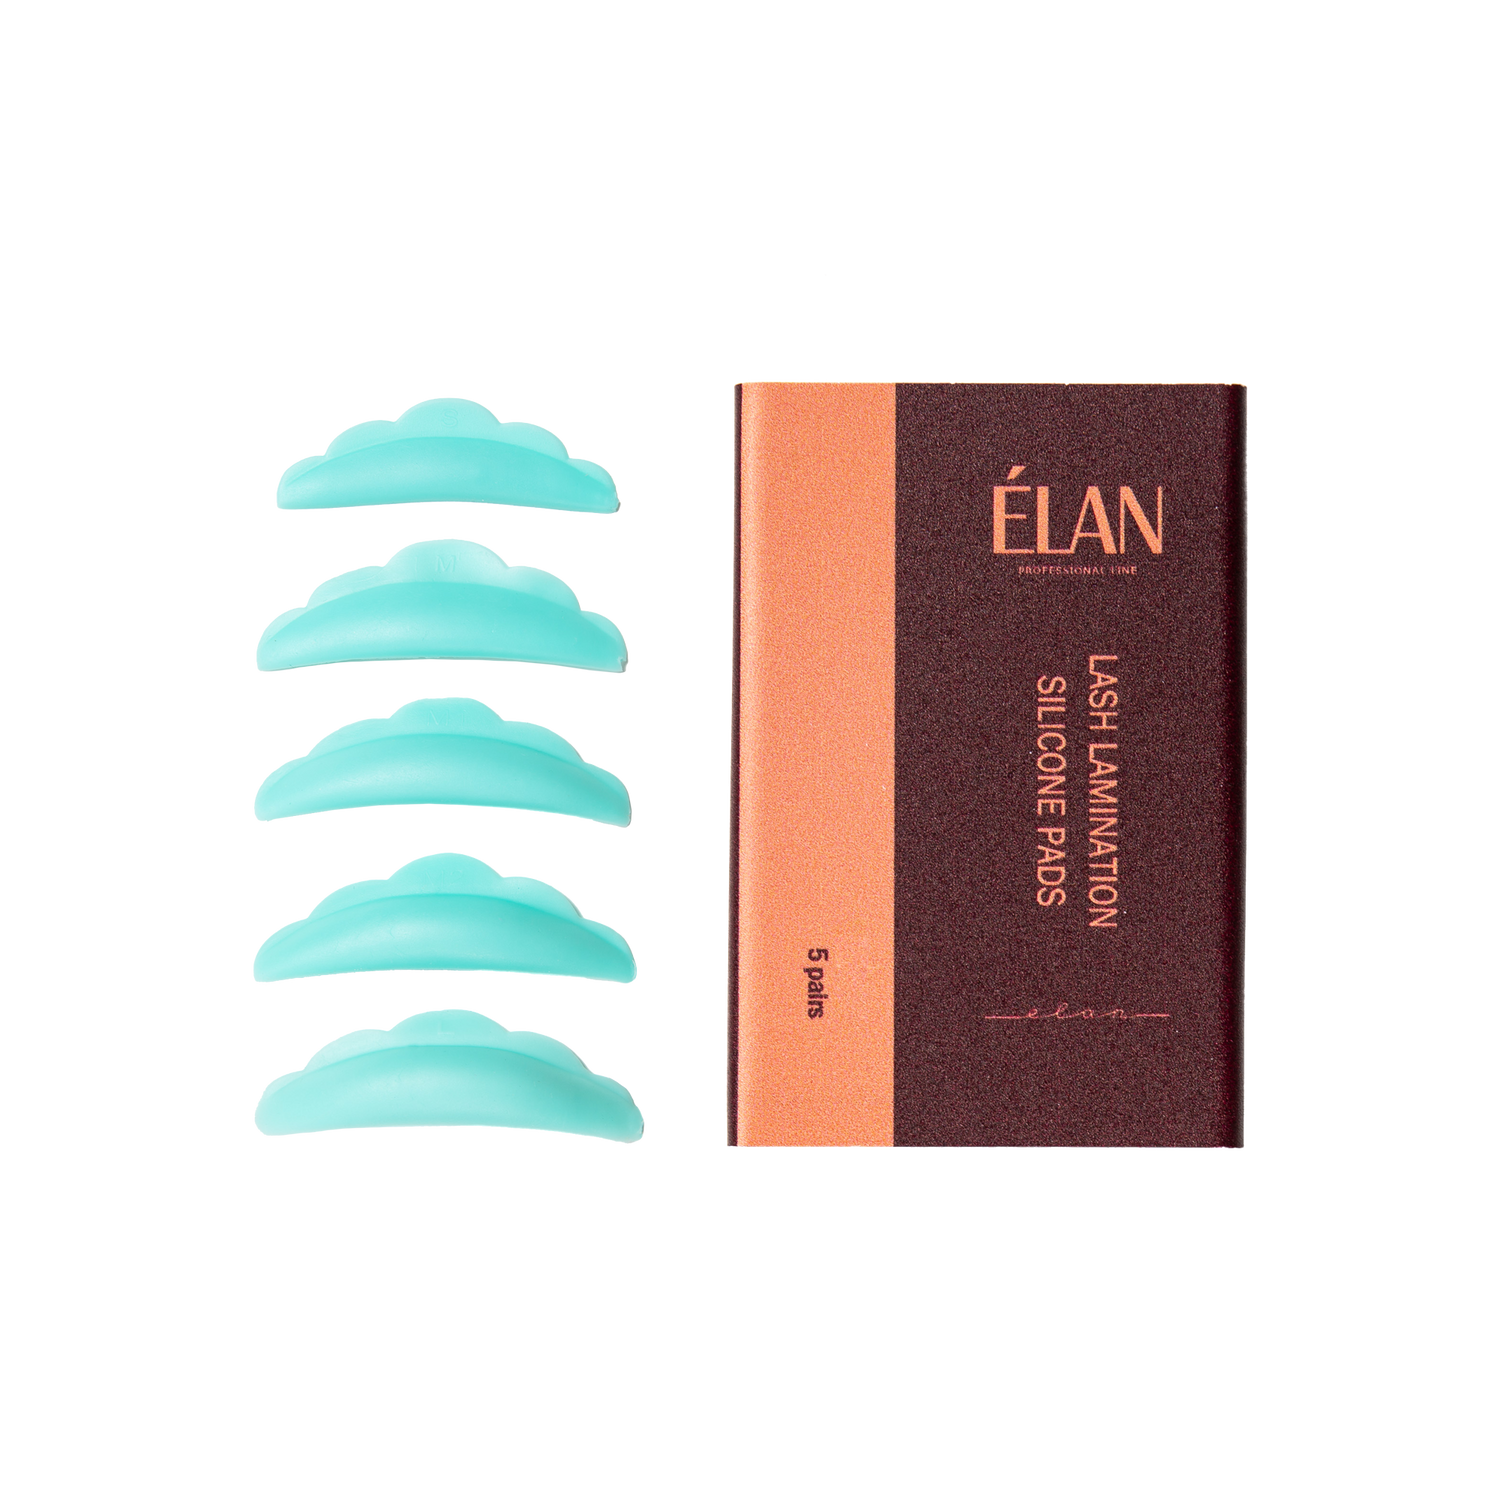 ÉLAN - Silicone Pads for lash lifts - (Size M1, 5 pairs)